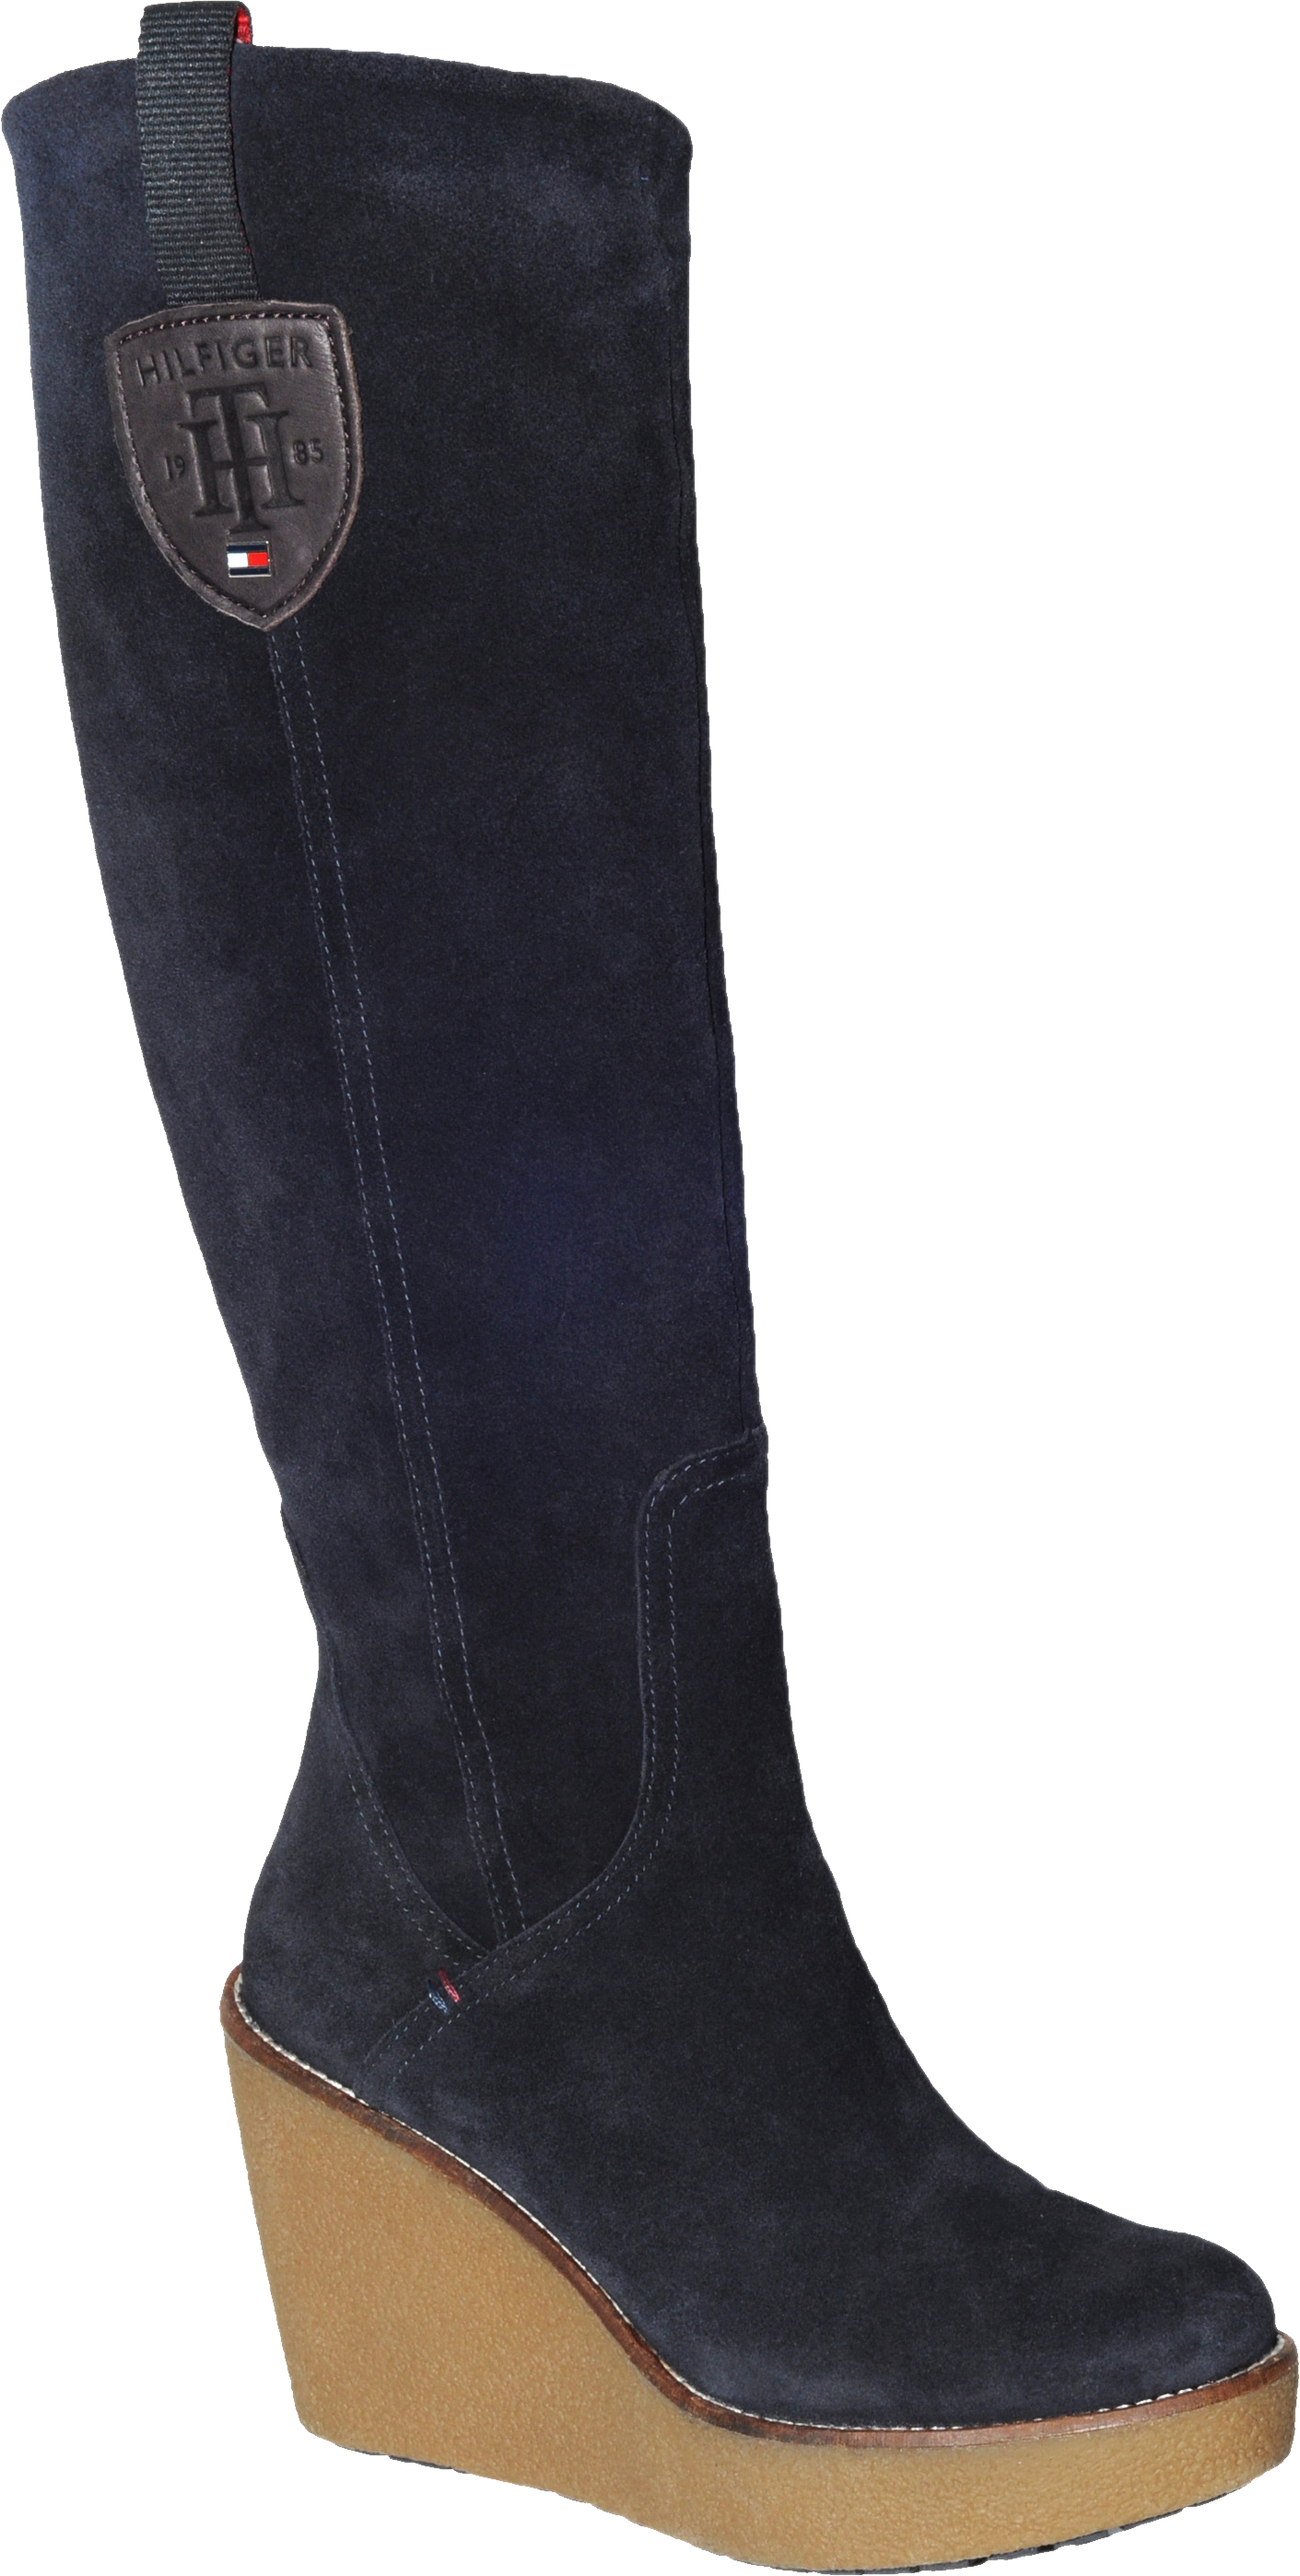 Boots PNG Background Clip Art